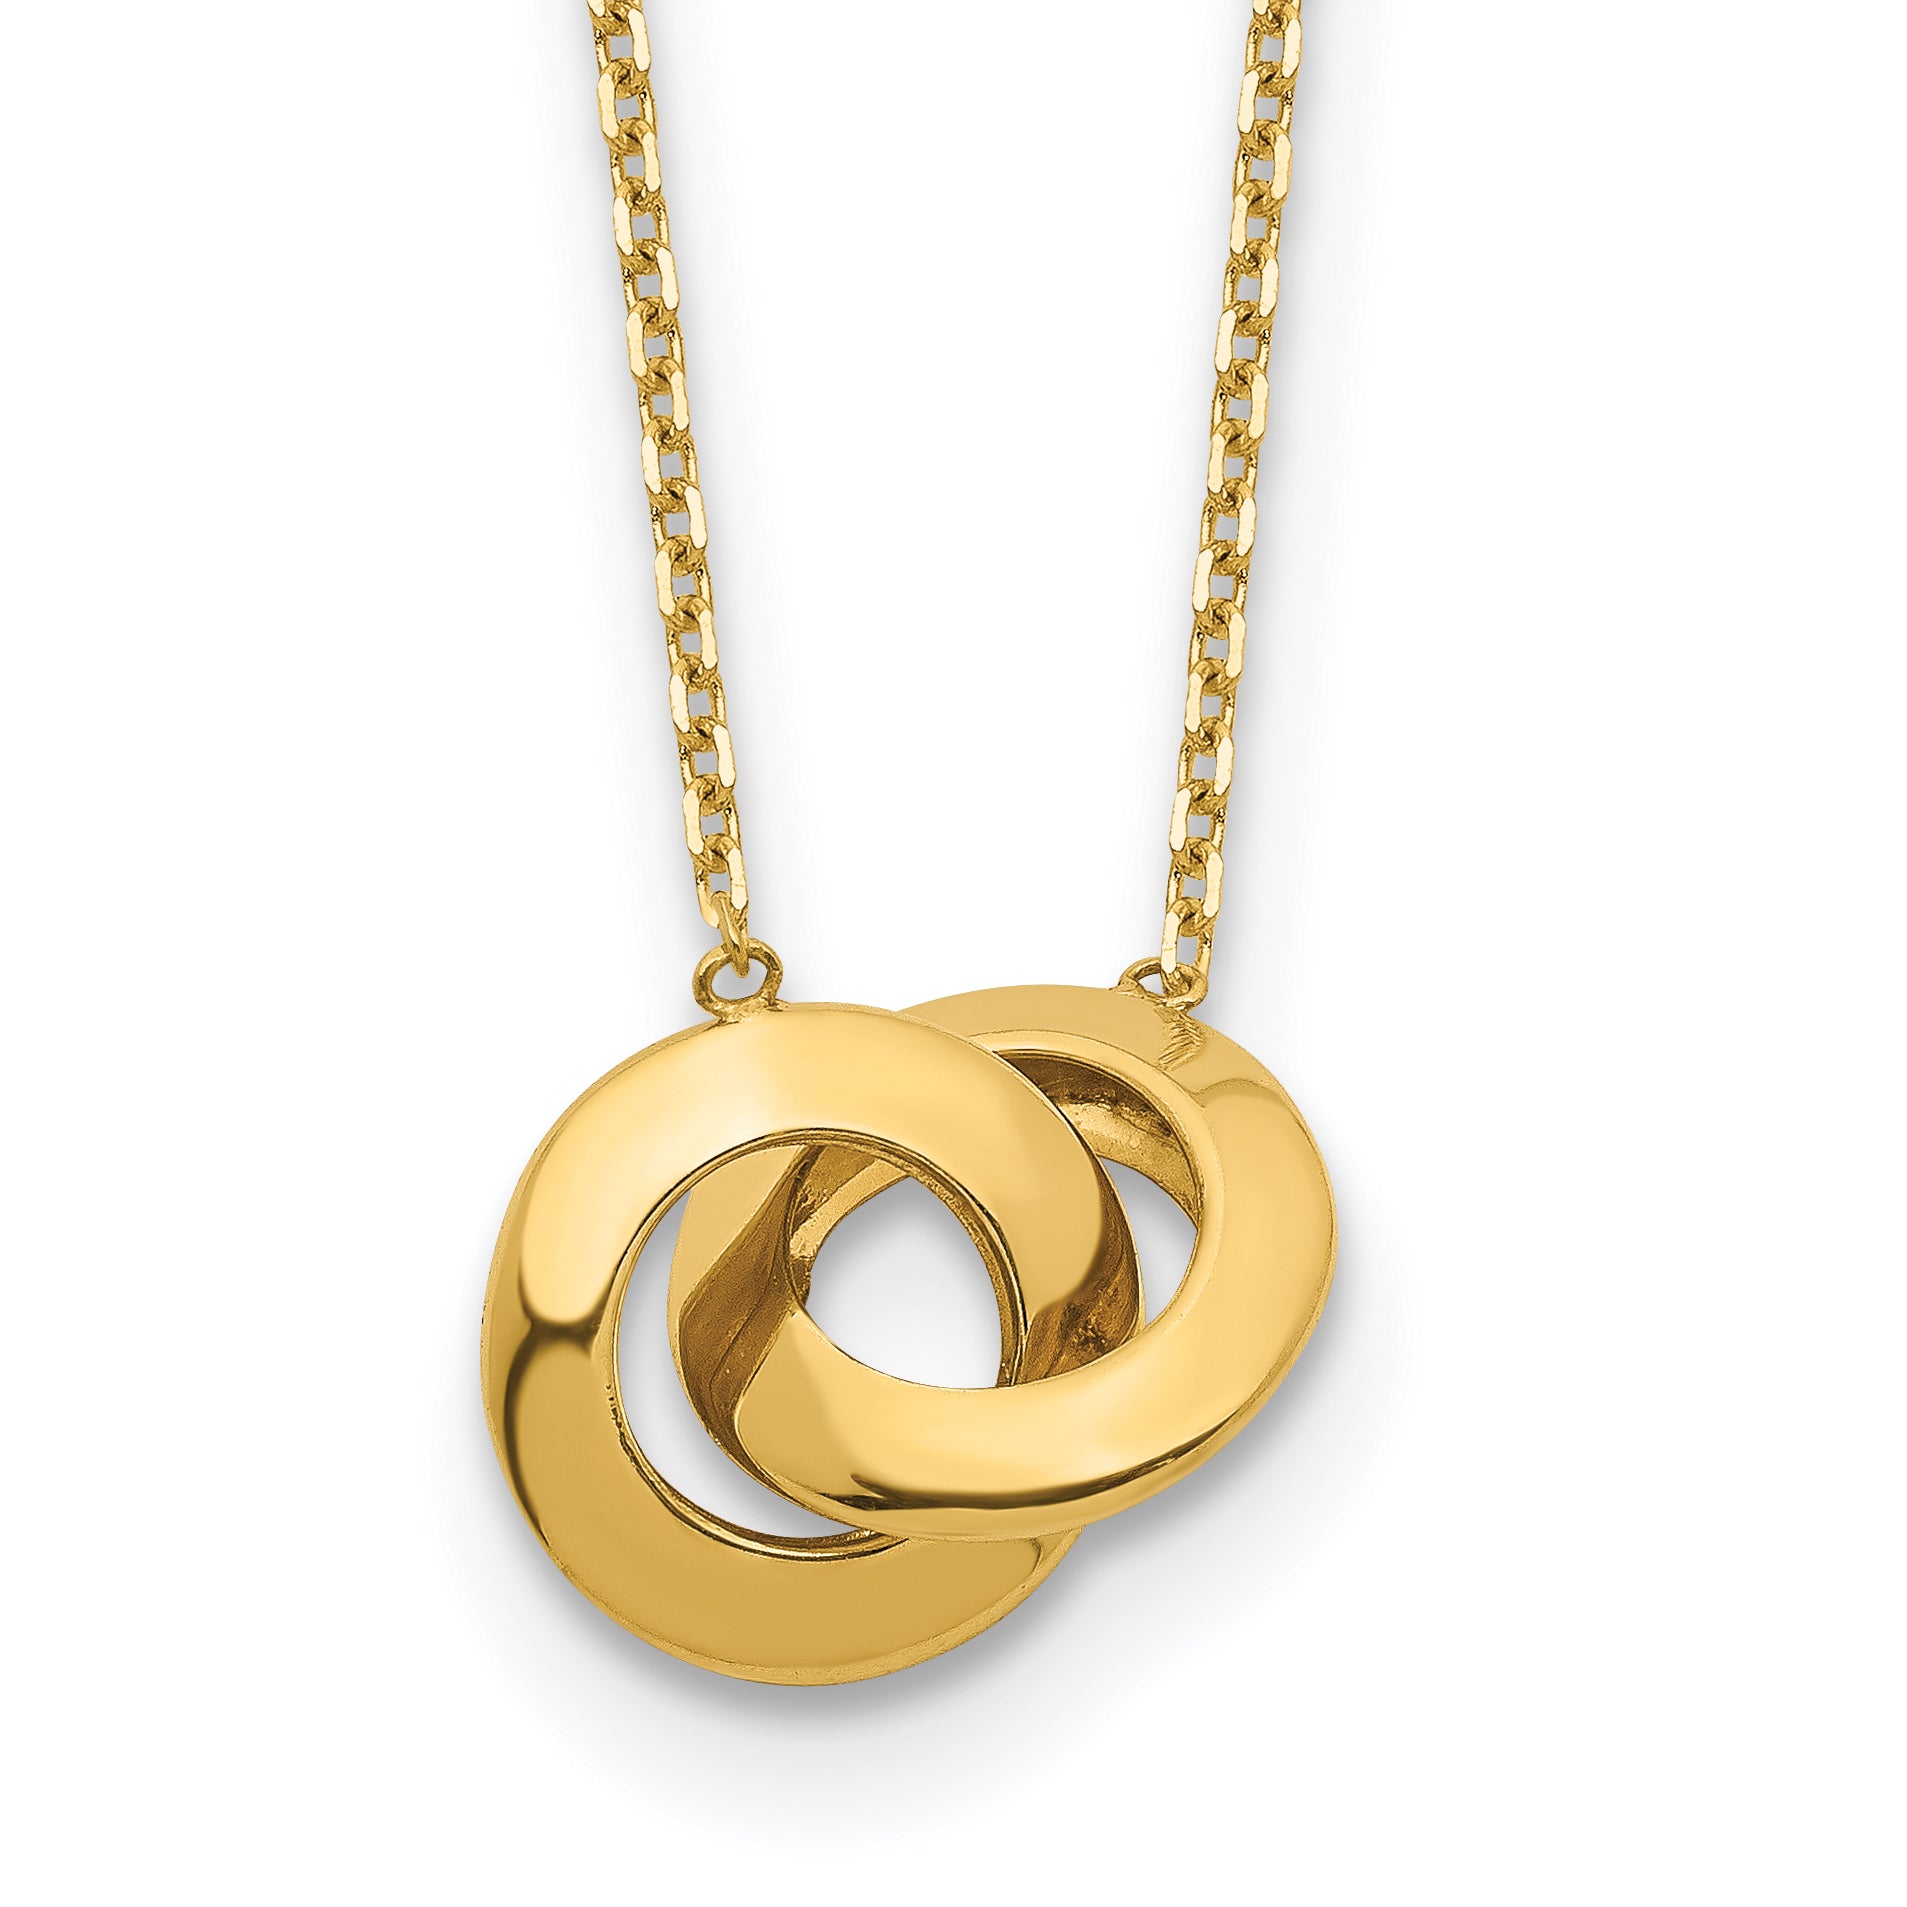 14k Polished Fancy Interlocking Circle 16 inch with 1 inch ext. Necklace